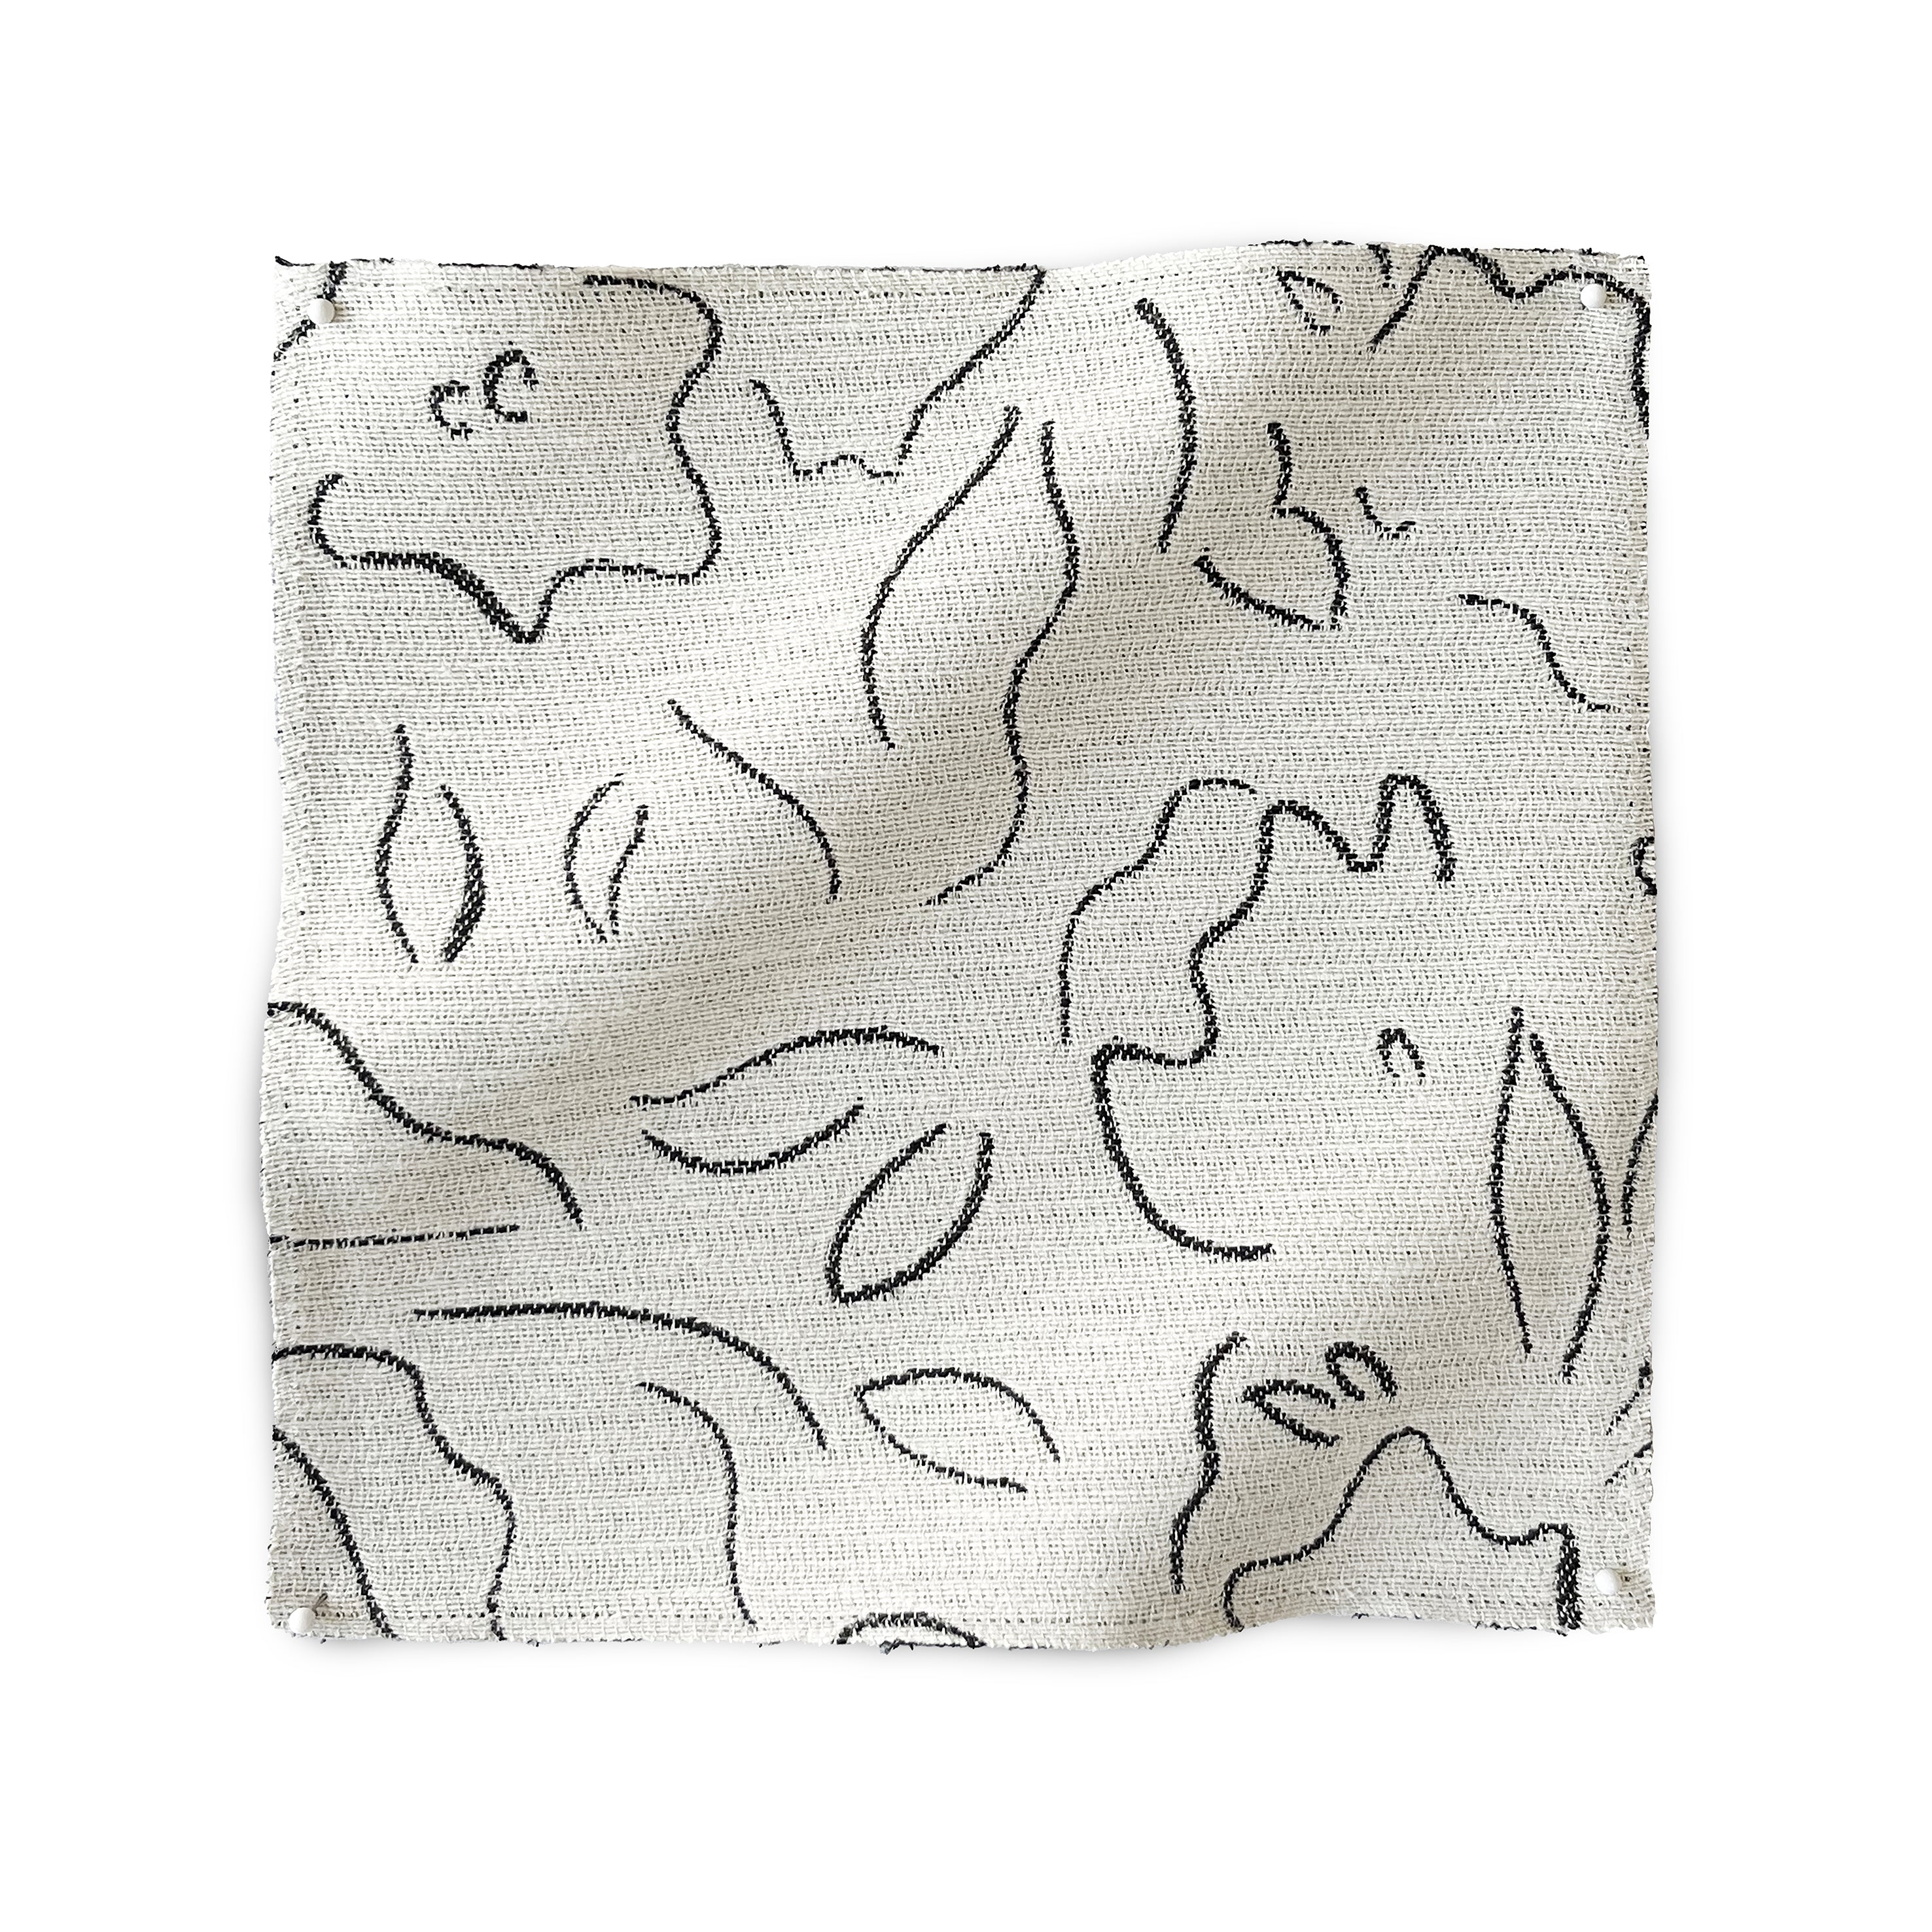 Square fabric swatch in a minimalist floral print in charcoal on a cream field.